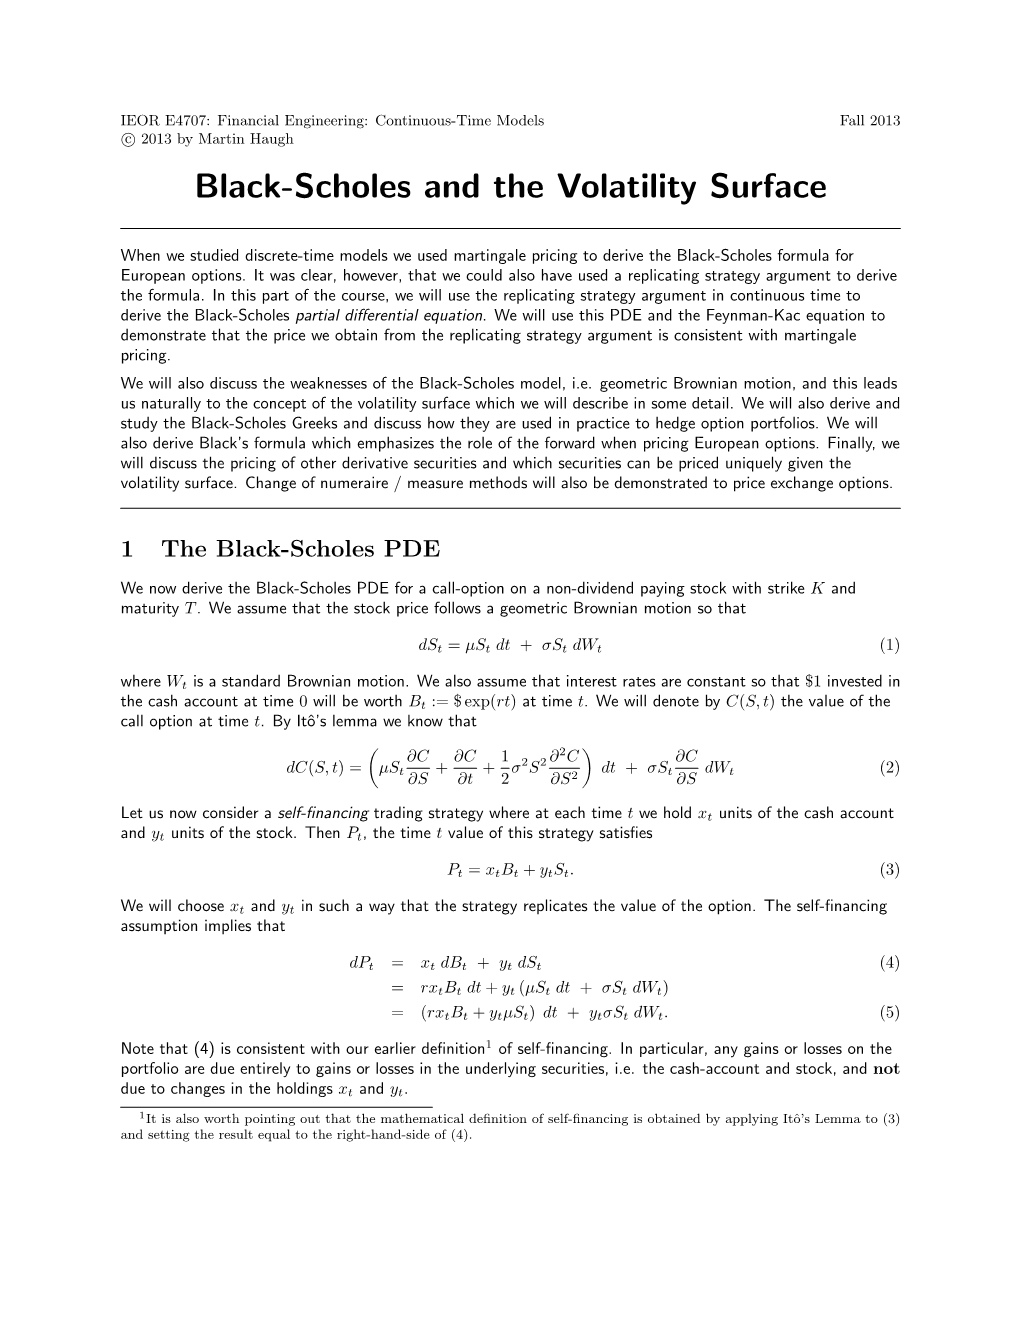 Black-Scholes and the Volatility Surface